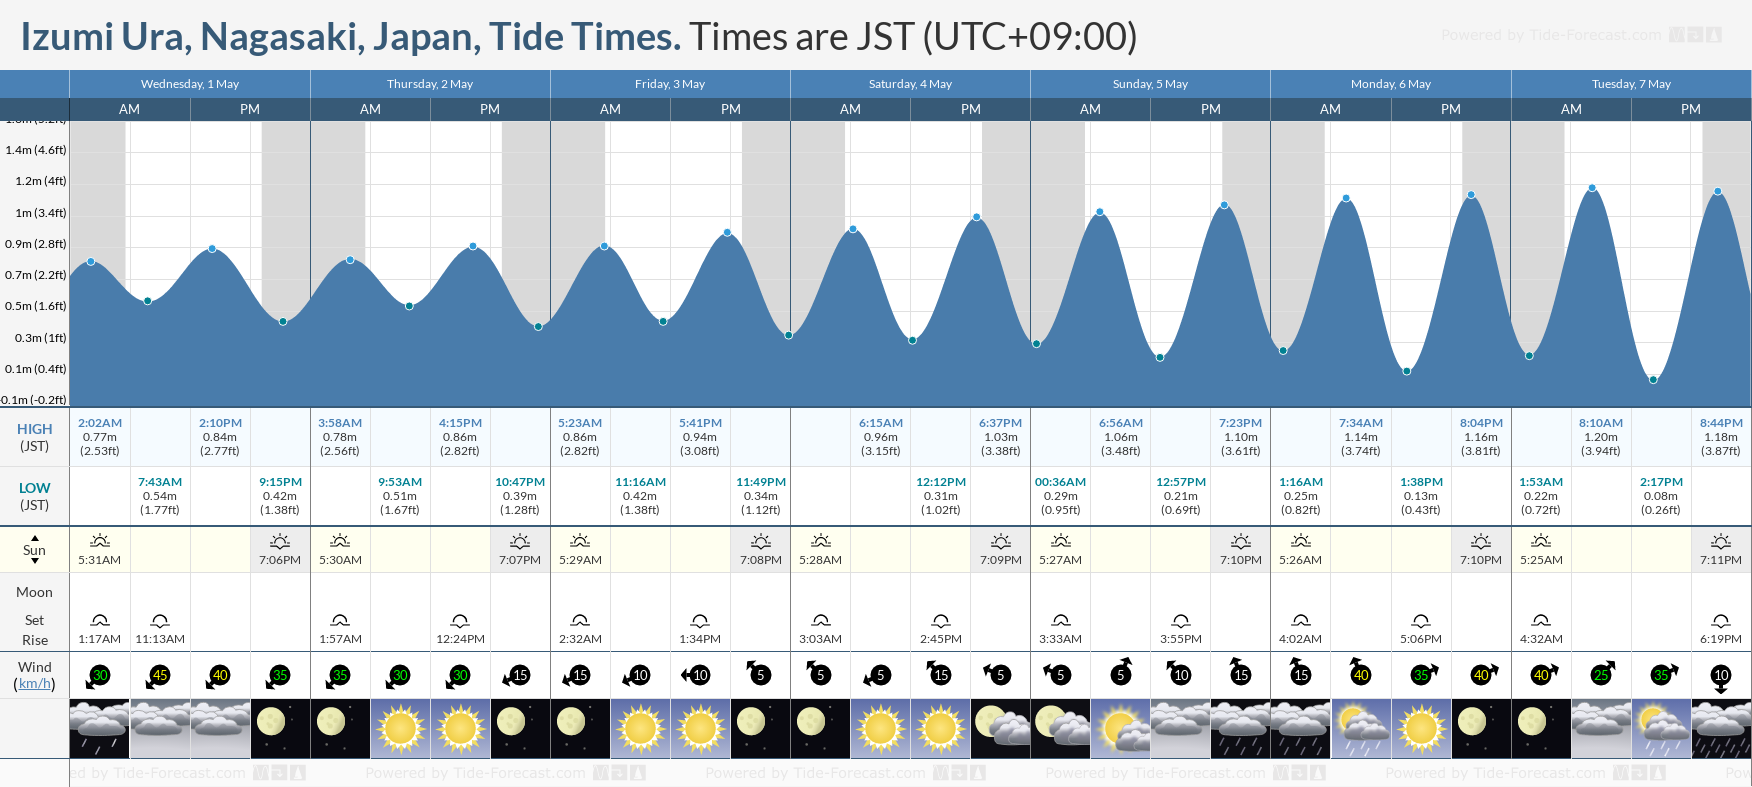 Izumi Ura, Nagasaki, Japan Tide Chart including high and low tide times for the next 7 days